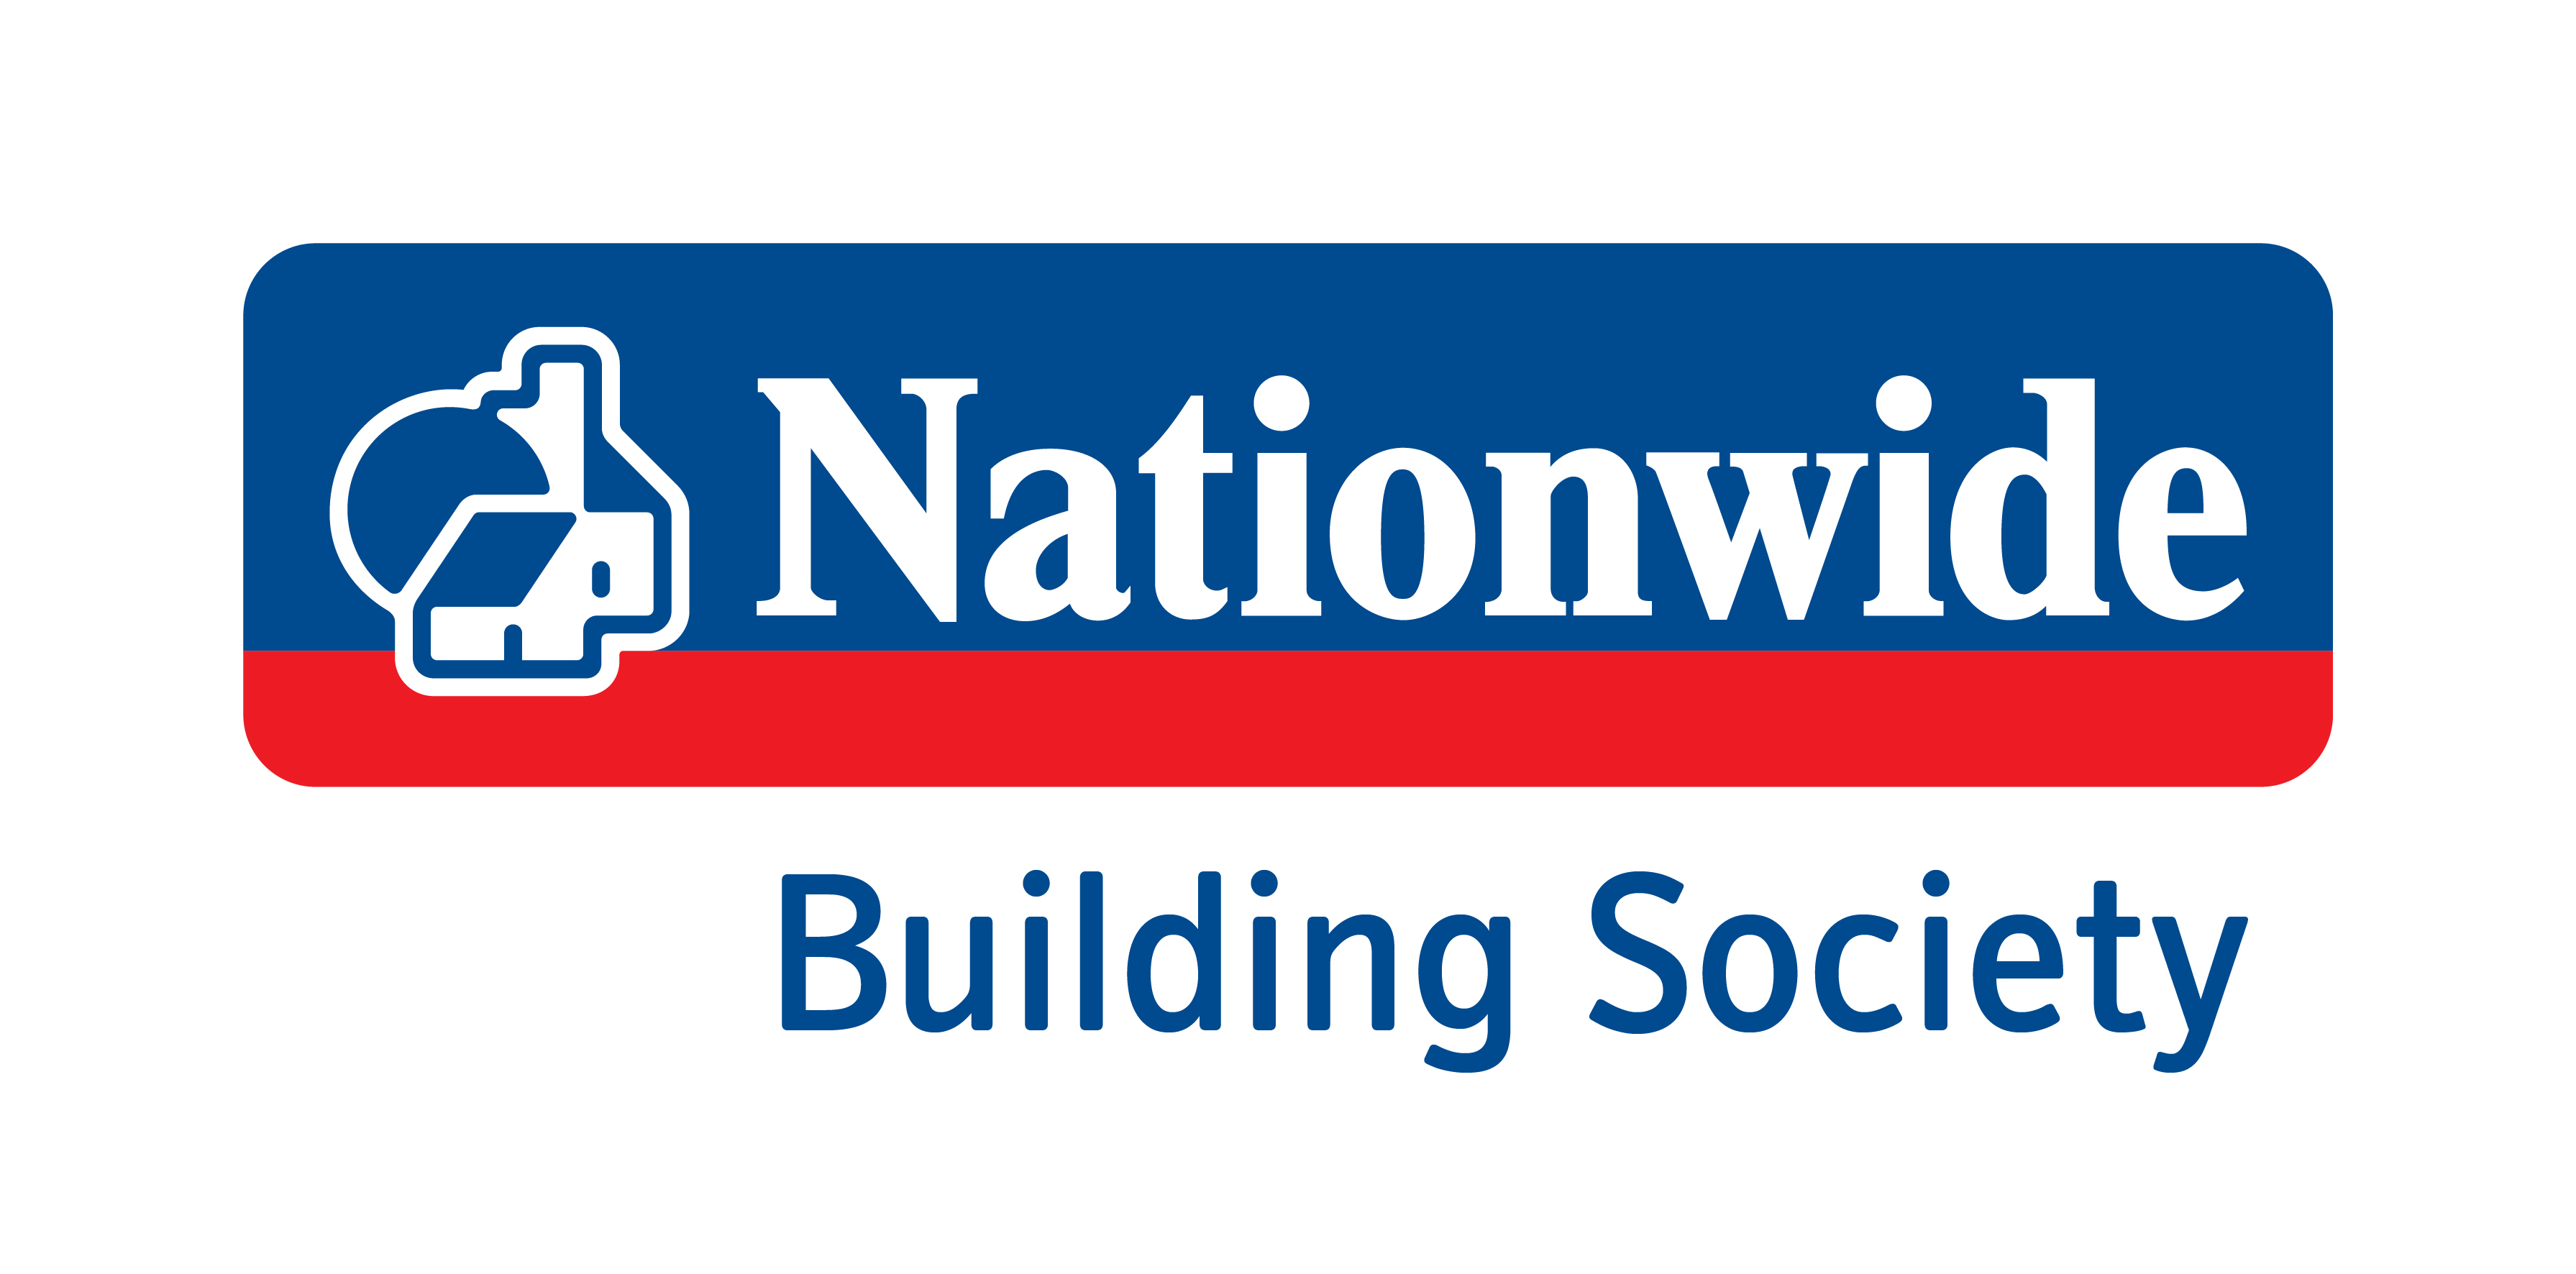 Nationwide lowering mortgage rates by up to 0.55% 